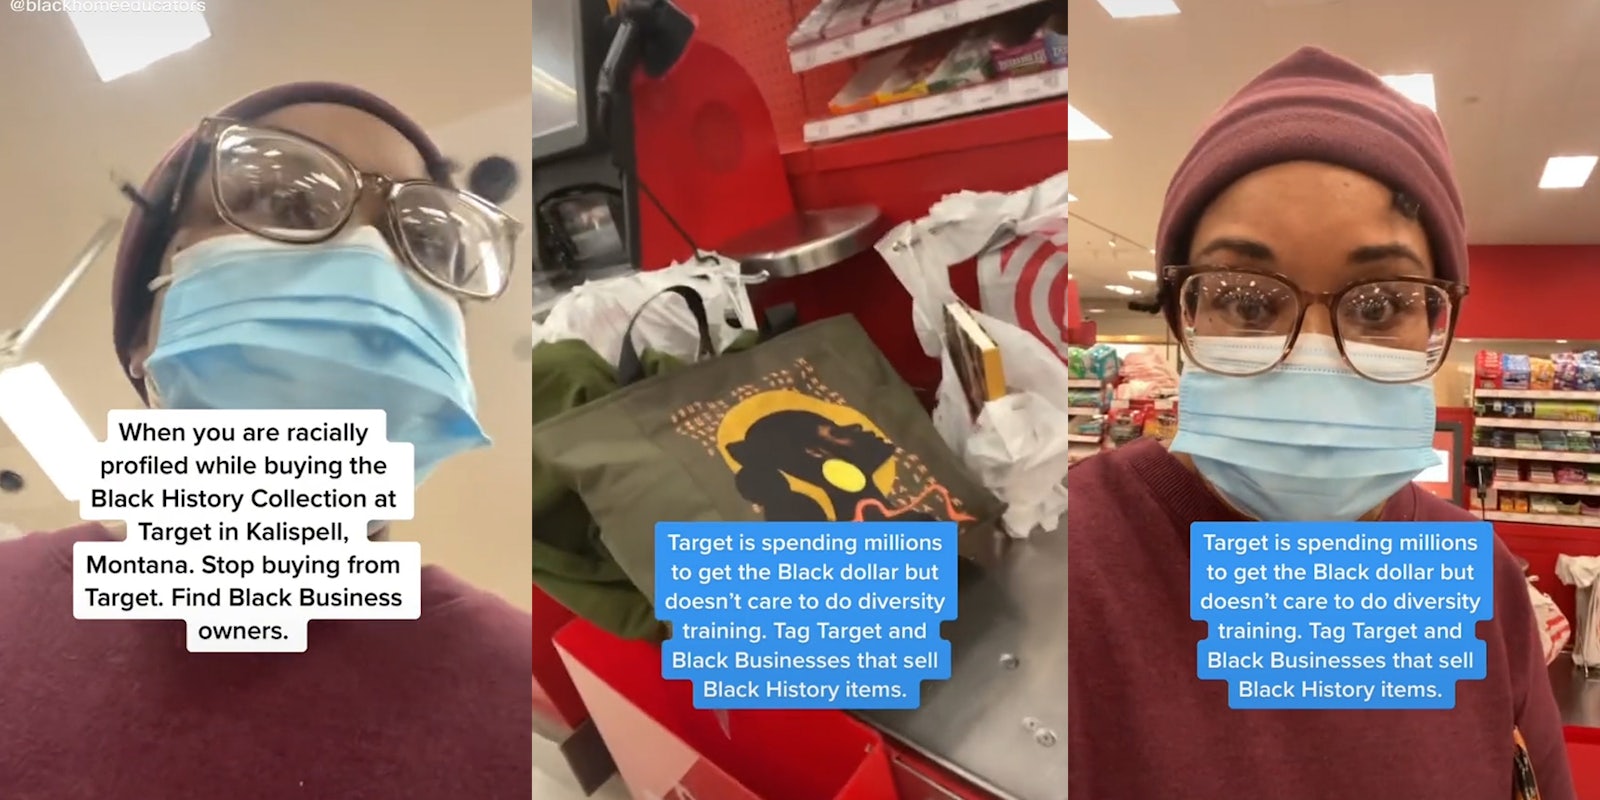 Young woman at Target with captions 'When you are racially profiled while buying the Black History Collection at Target in Kalispell, Montana. Stop buying from Target. Find Black Business owners.' and 'Target is spending millions to get Black dollar but doesn't care to do diversity training. Tag Target and Black Businesses that sell Black History items.'